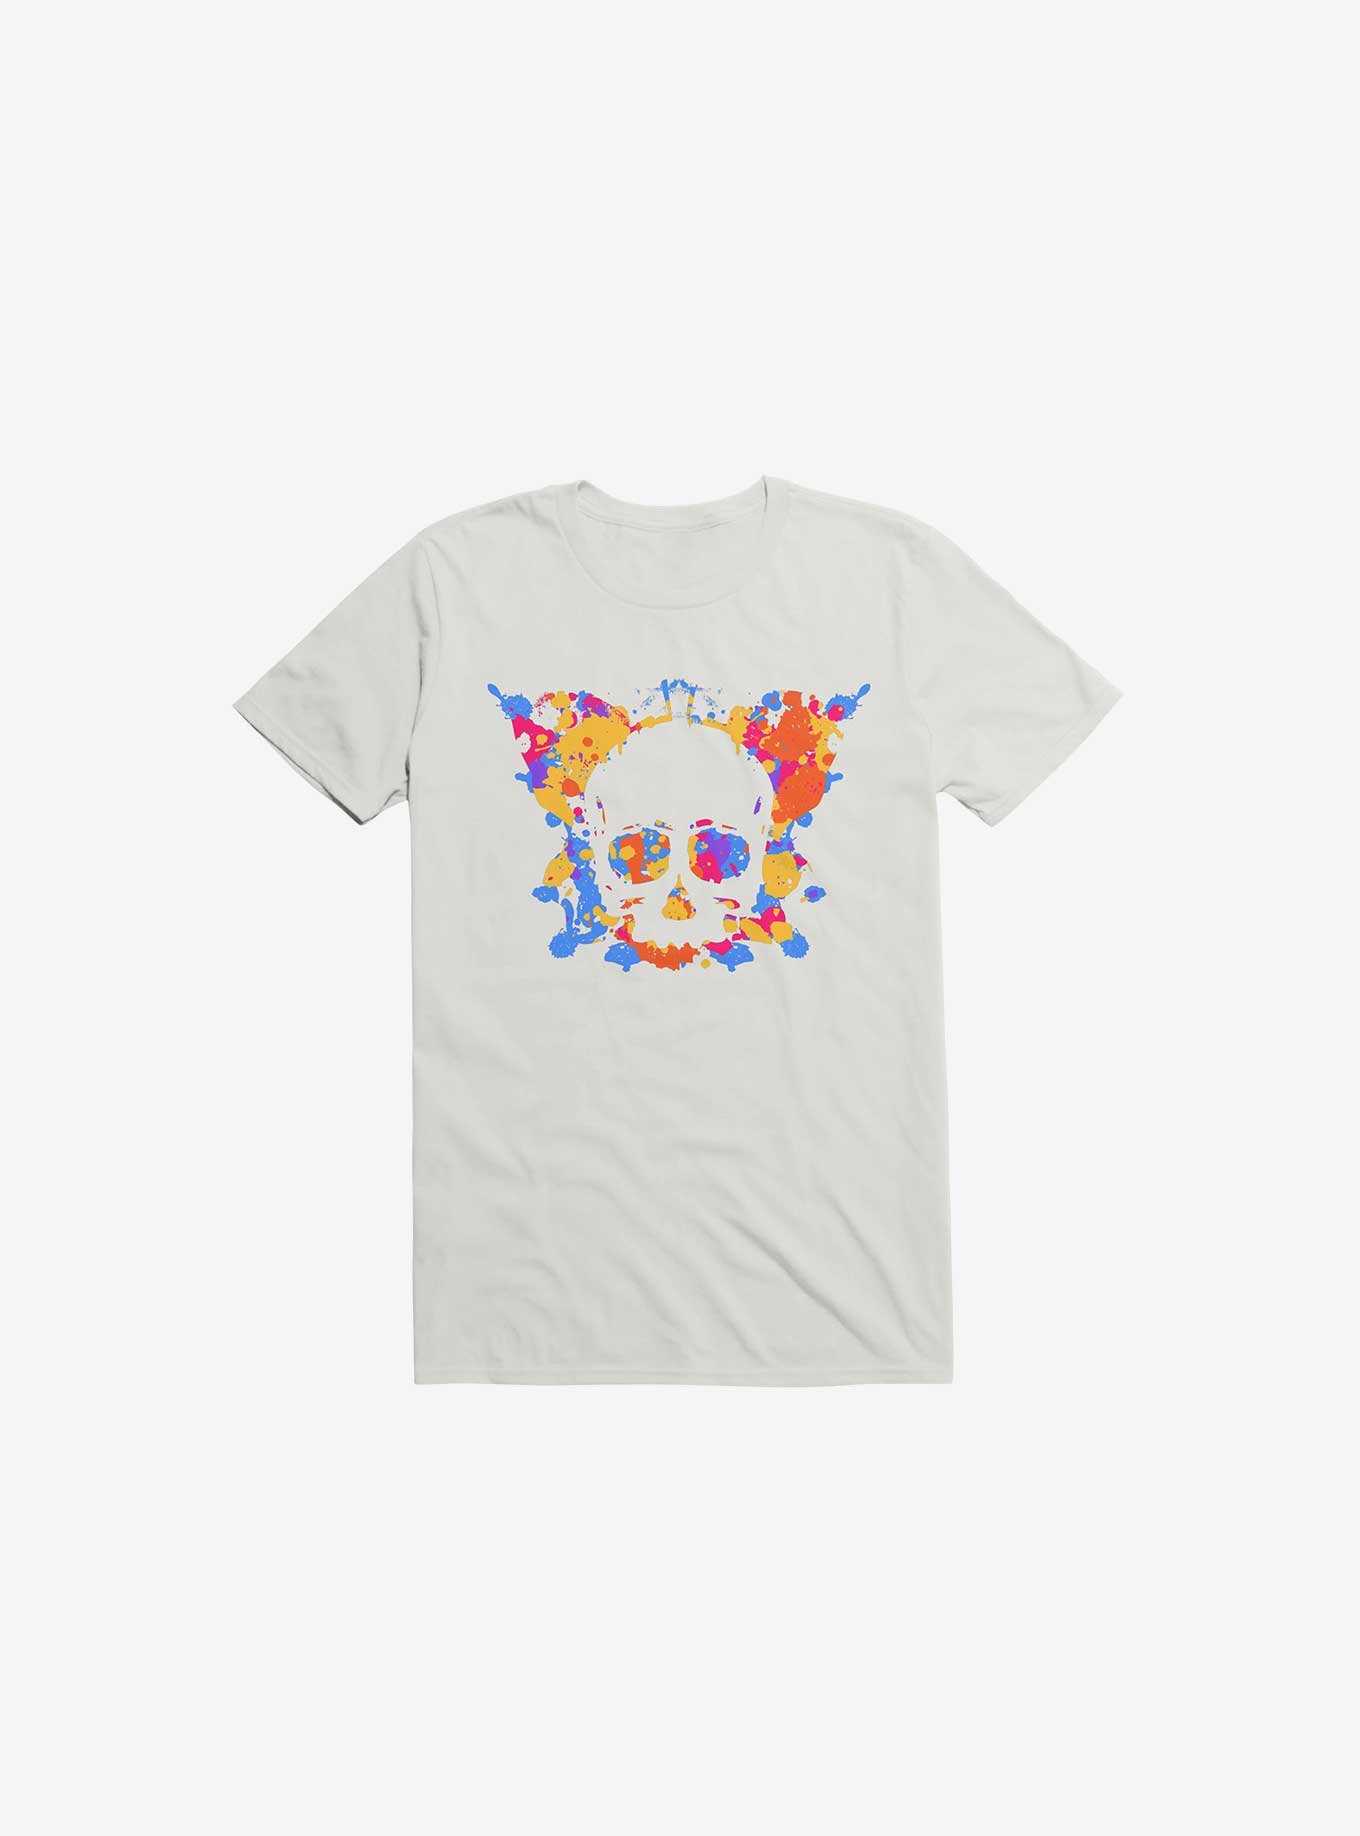 Inkblot Test Skull And Butterfly T-Shirt, , hi-res